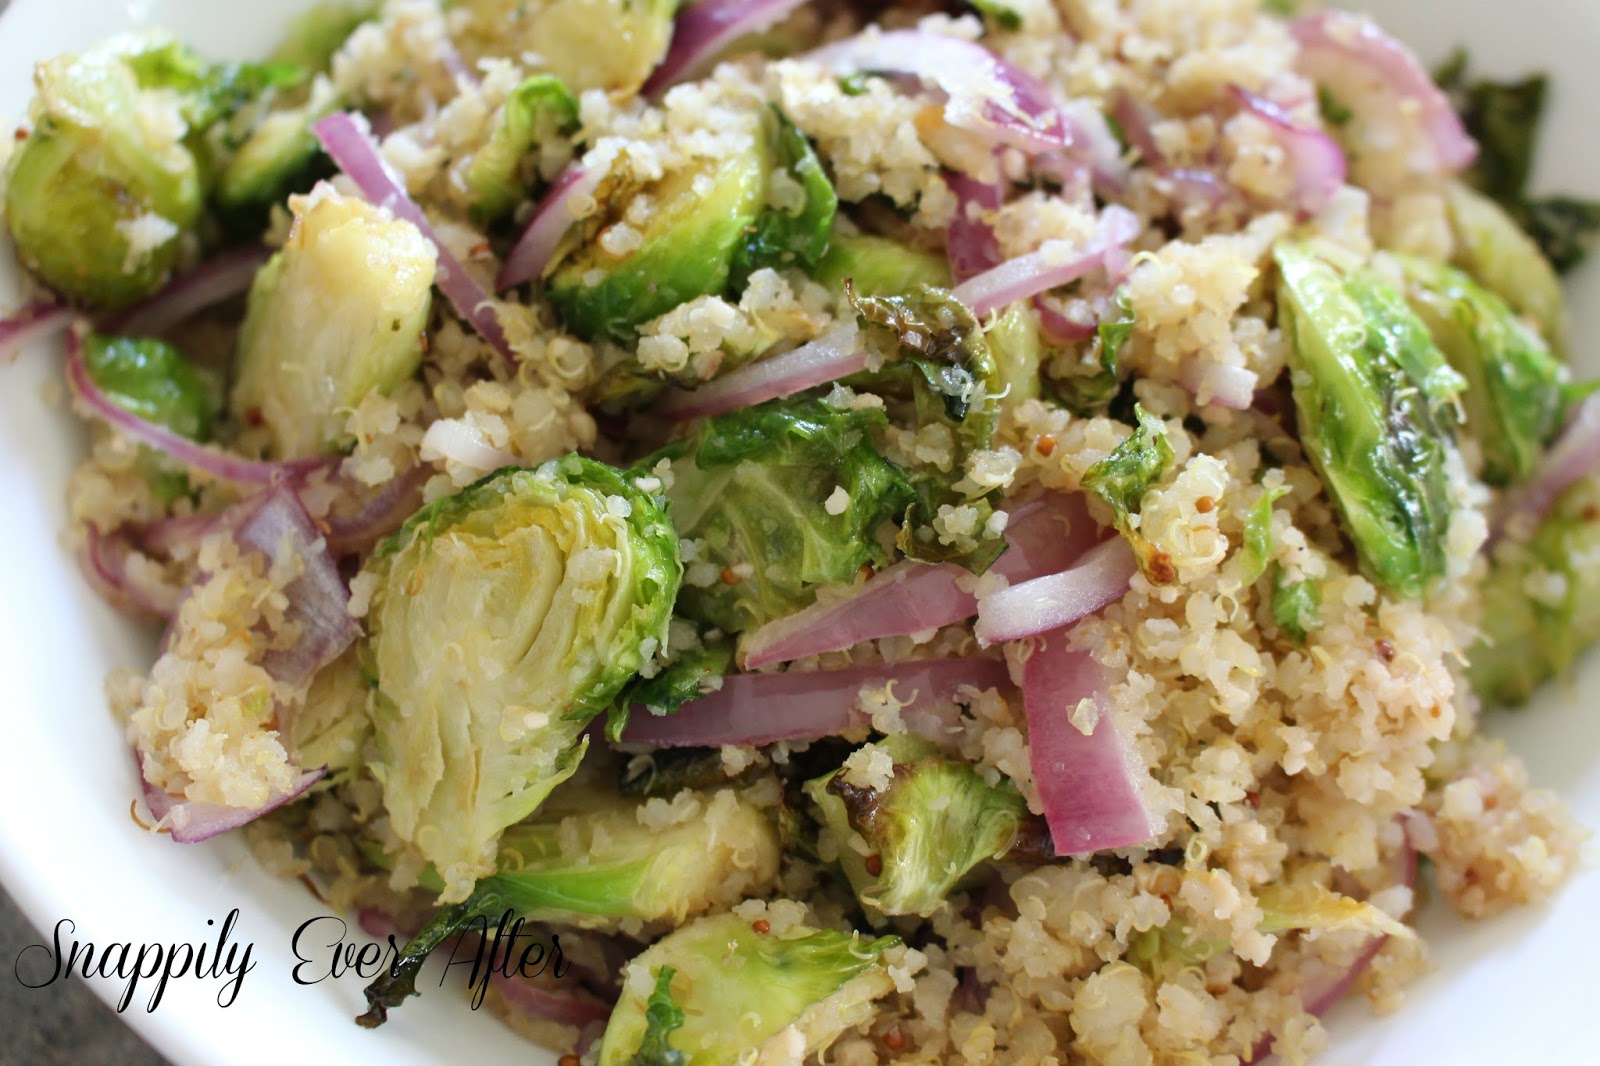 Snappily Ever After: Roasted Brussels Sprouts and Quinoa